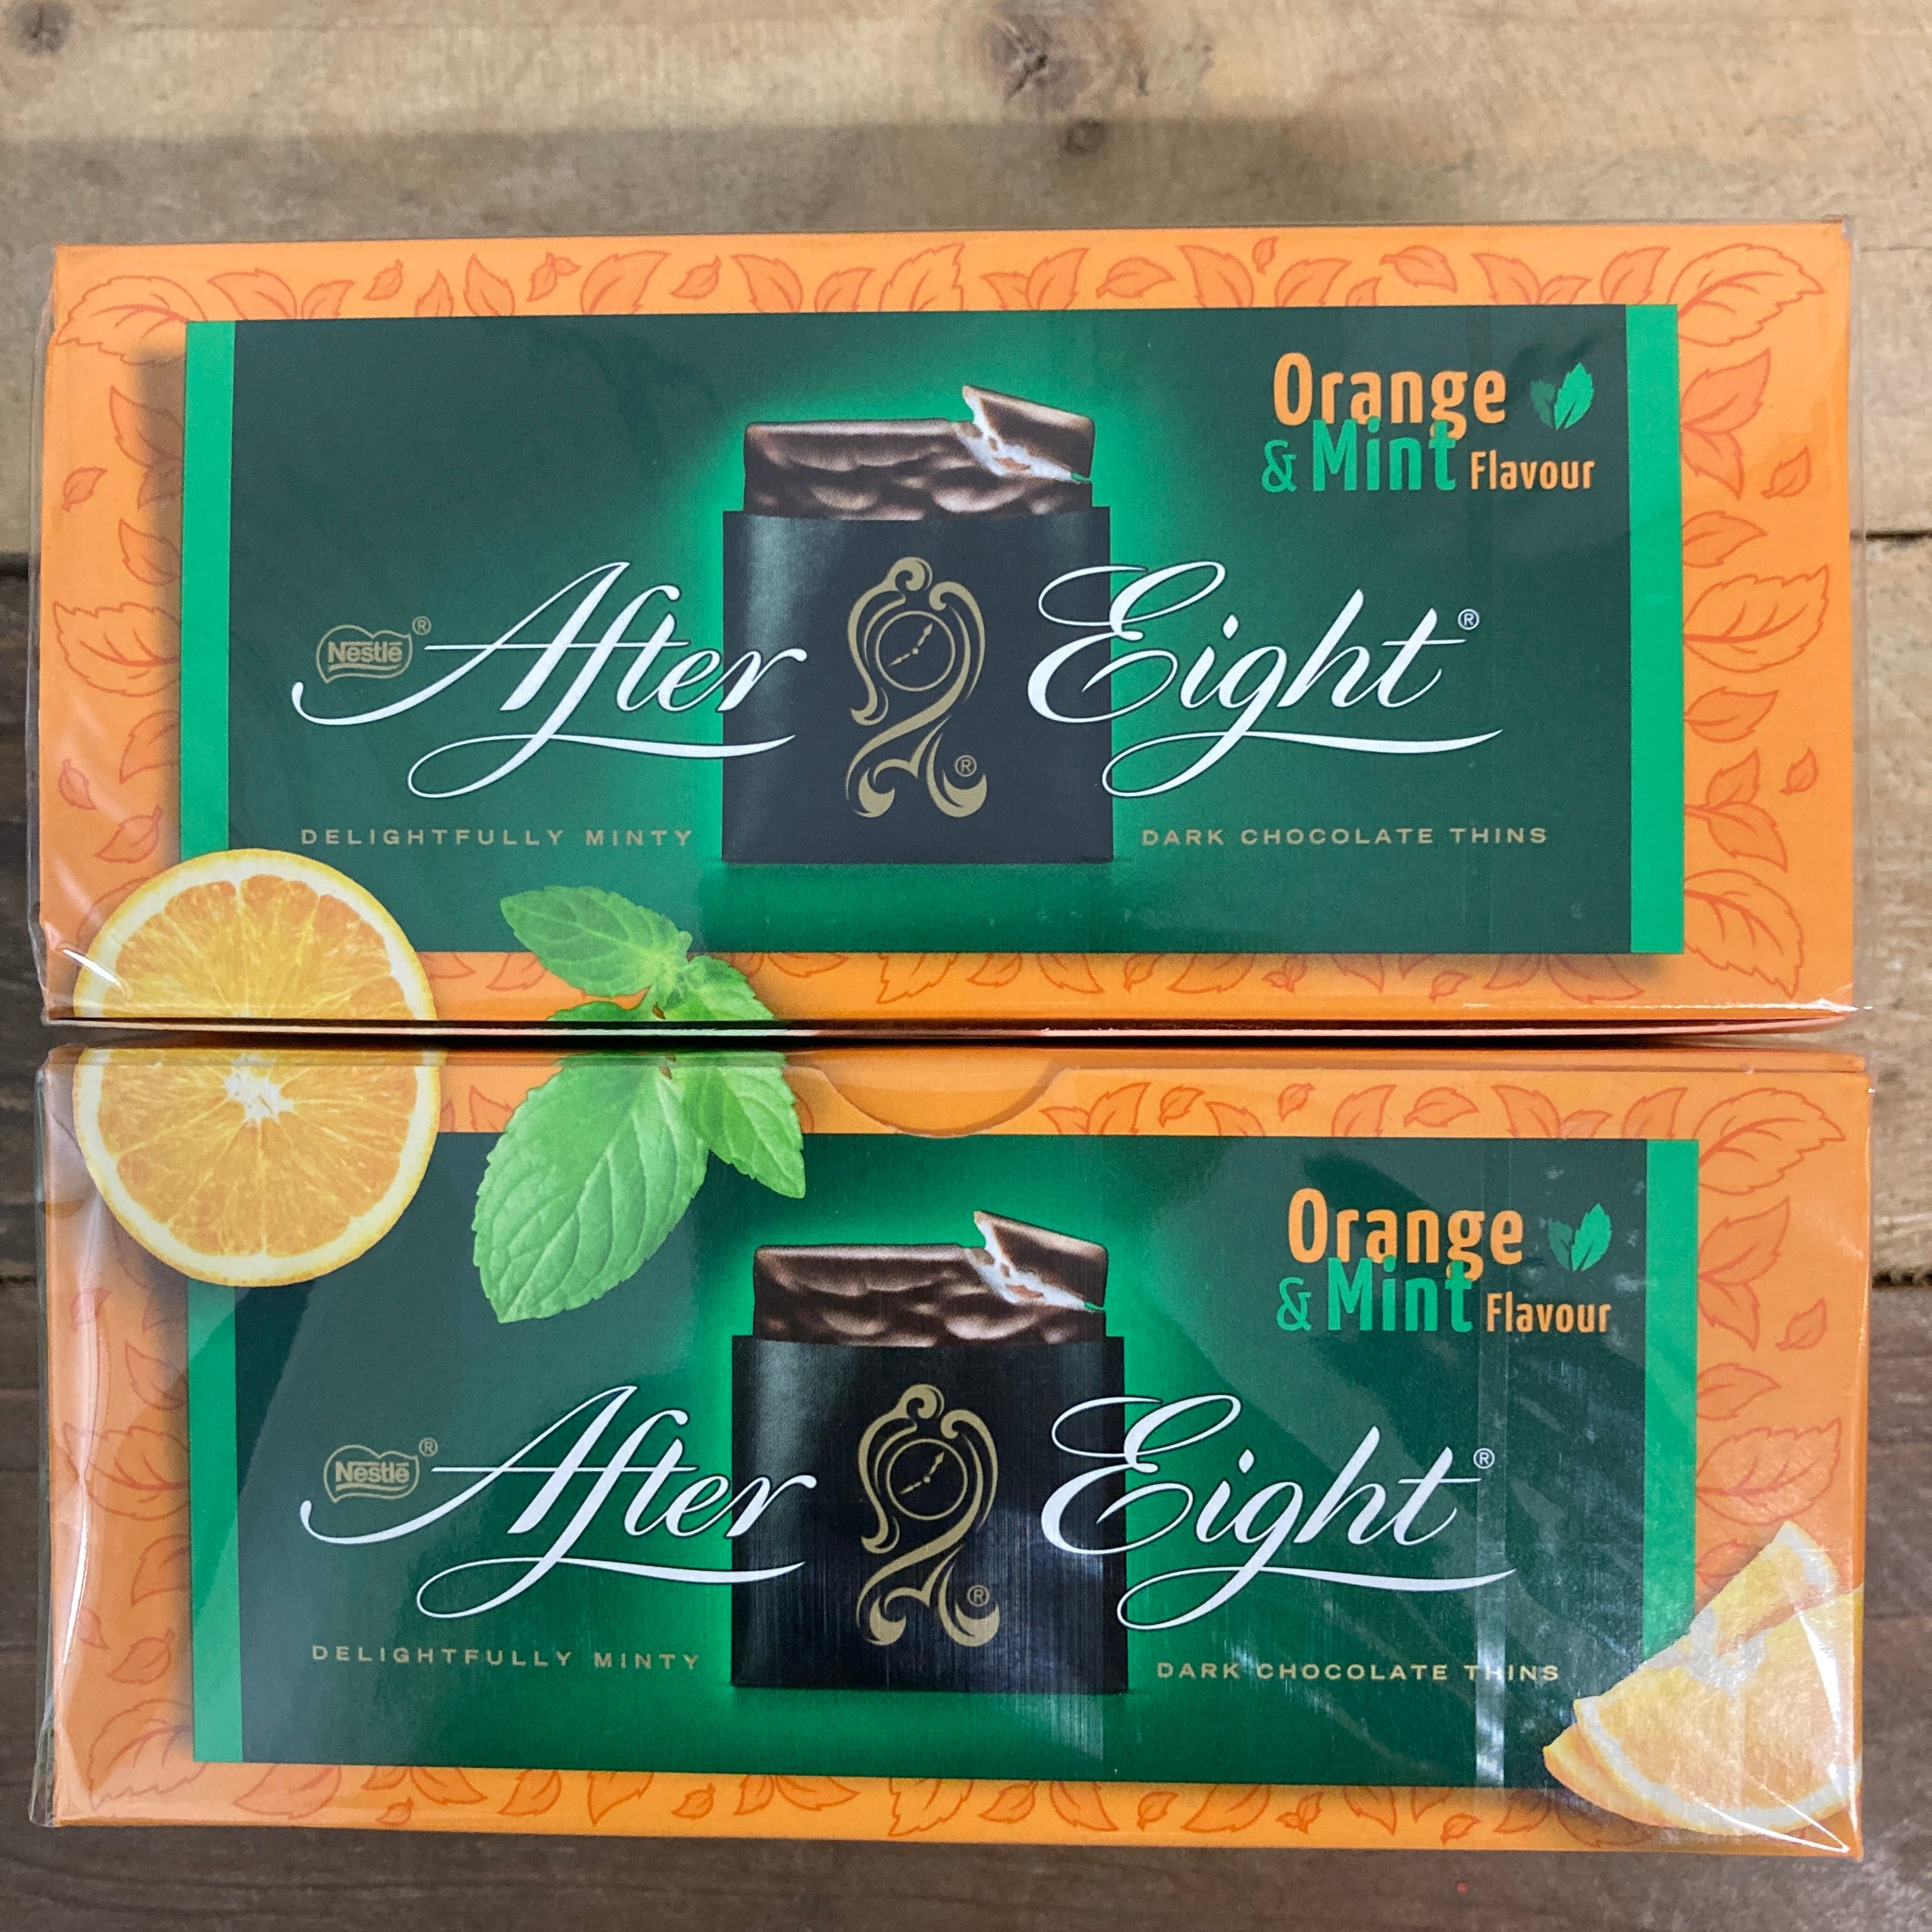 48x After Eight Orange & Mint Dark Chocolate Thins (2 boxes of 24x